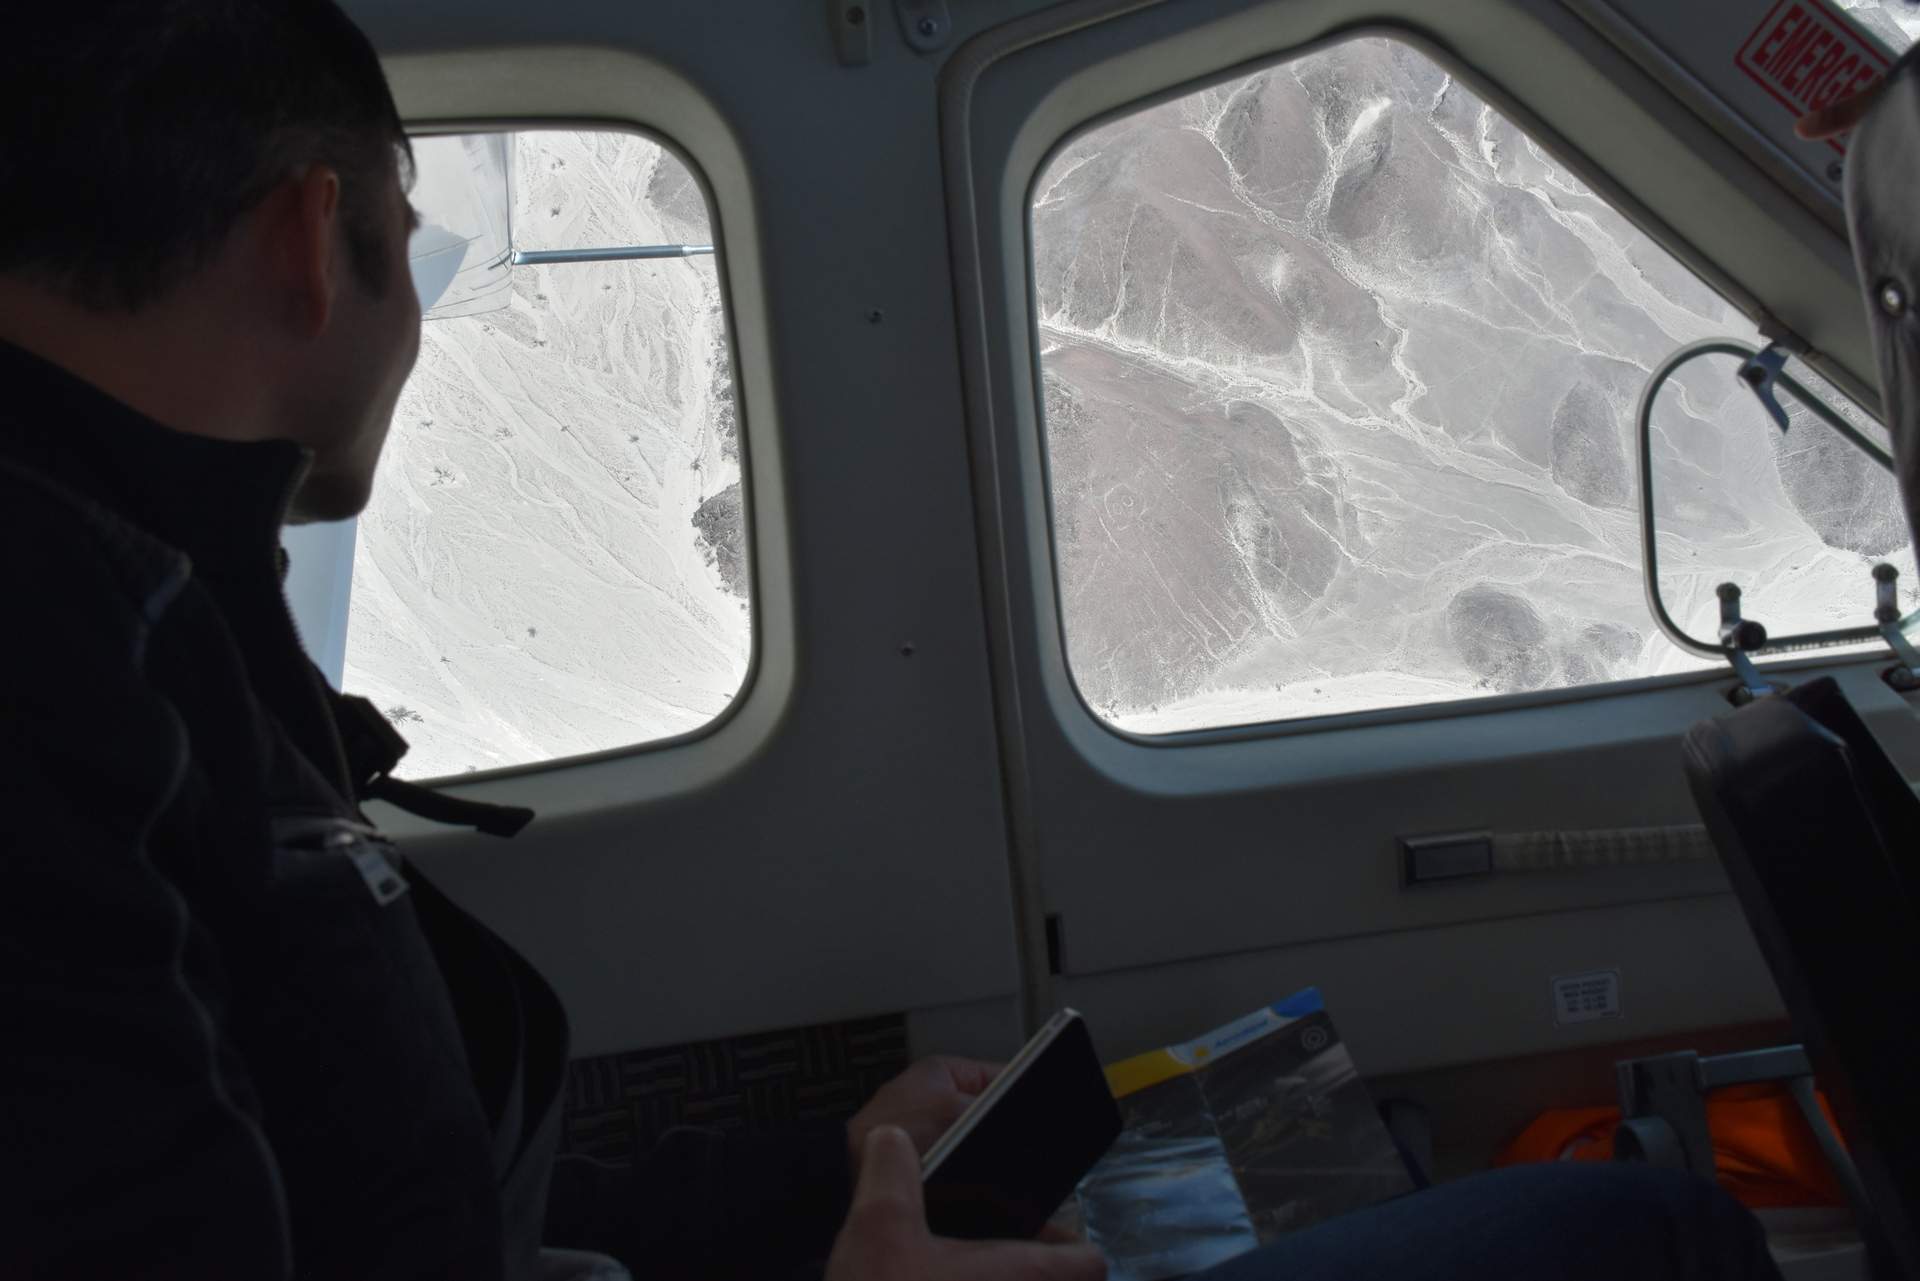 Felix Wong looking out the window of the airplane to view the Nazca Lines.